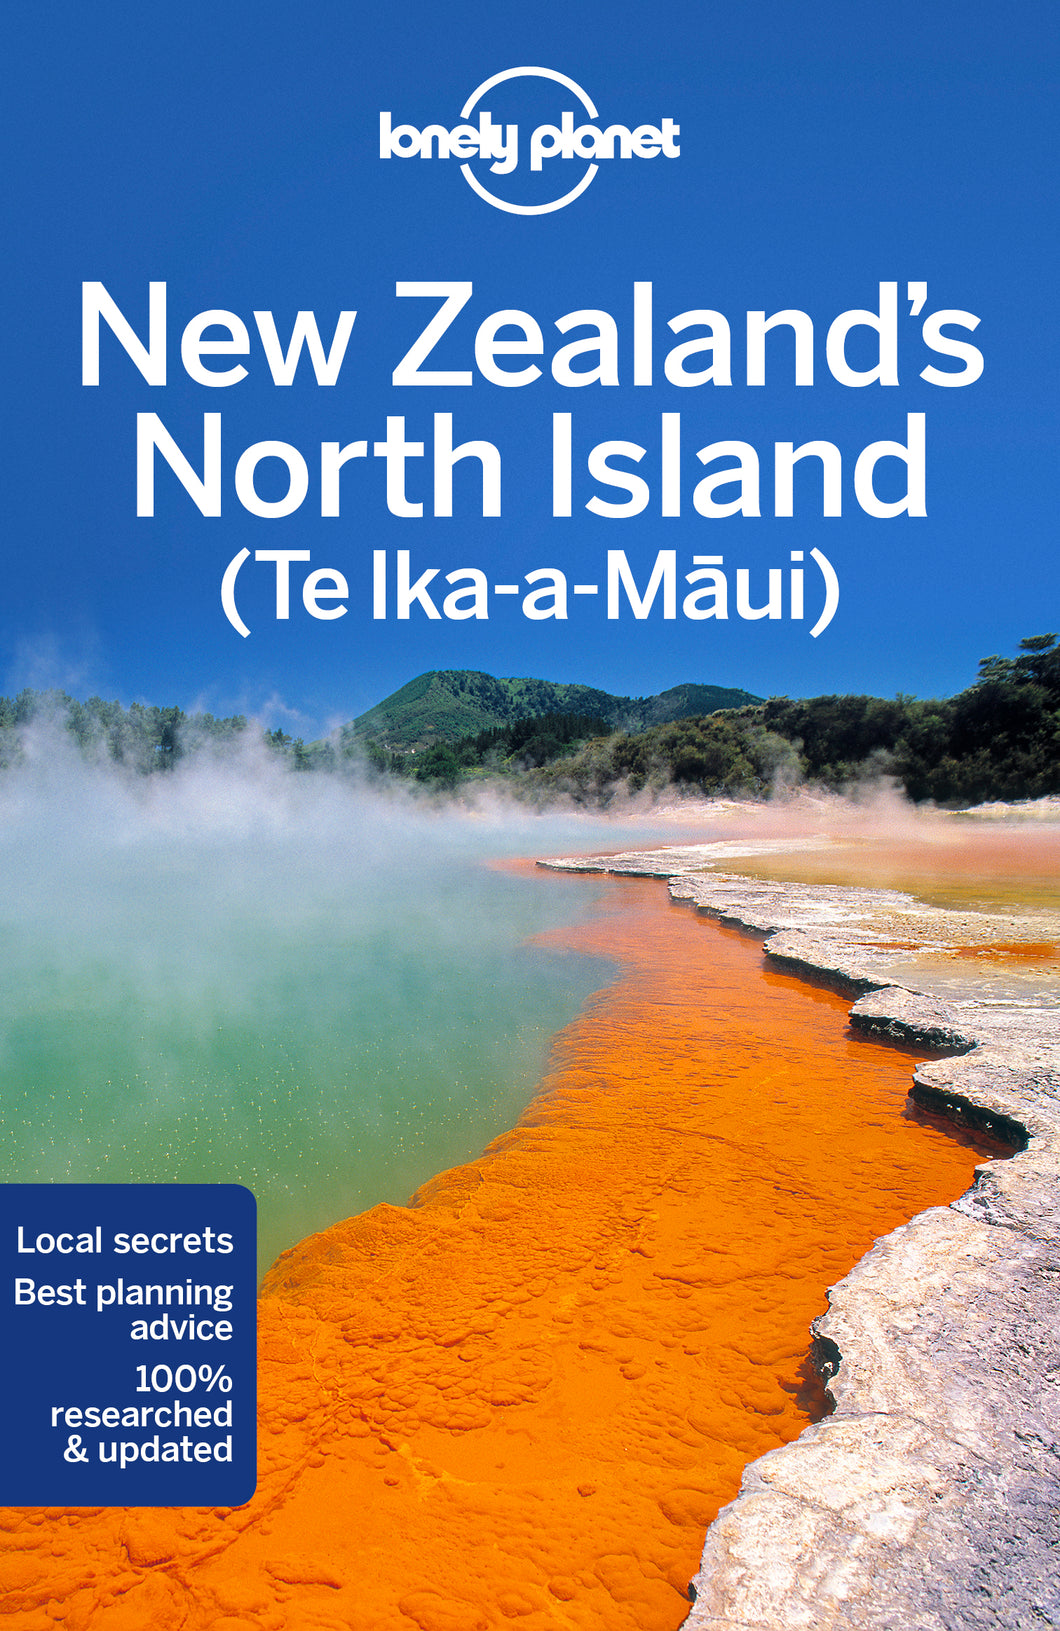 Lonely Planet New Zealand's North Island (Te Ika-a-Maui)